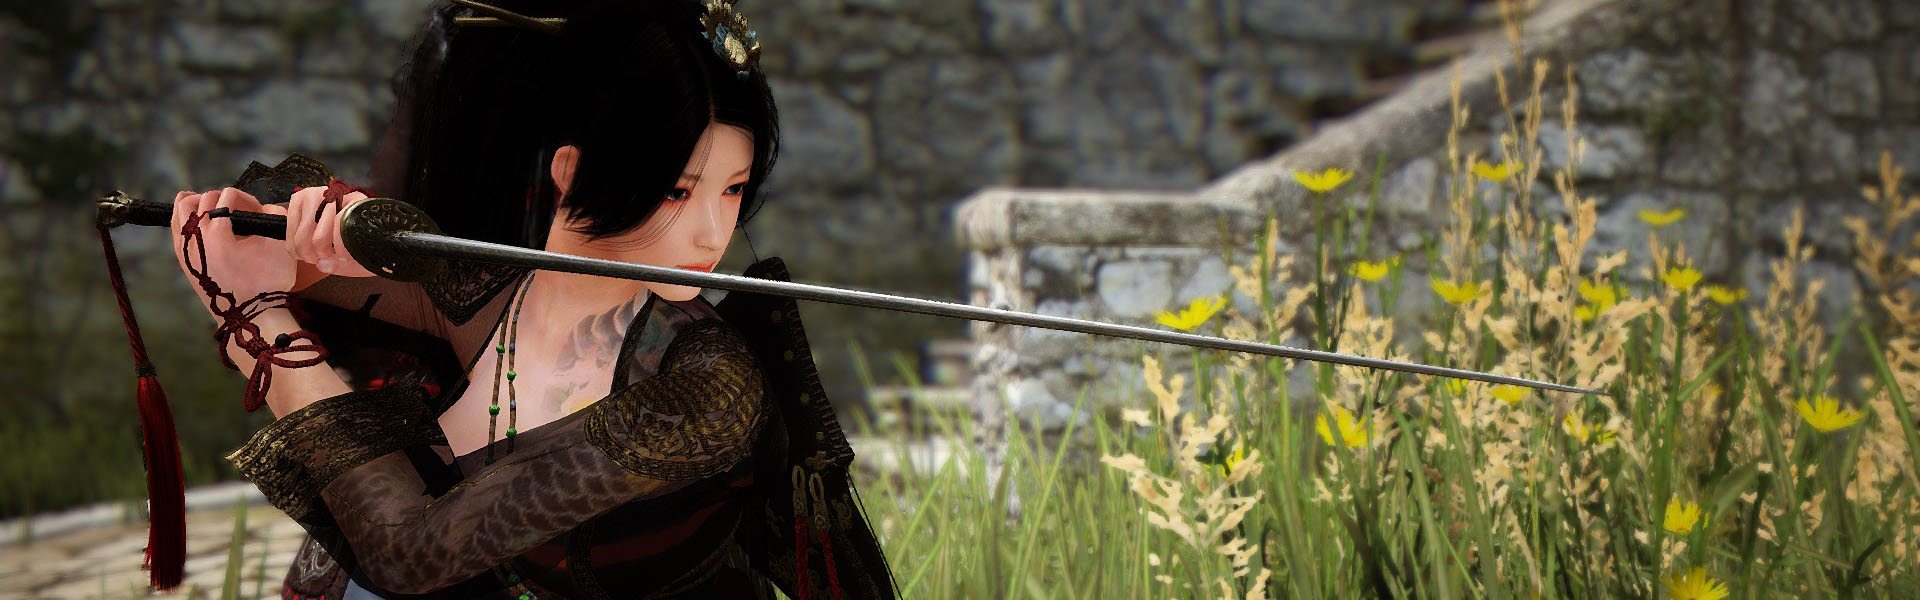 Musa and Maehwa will join Black Desert Online on April 20 12